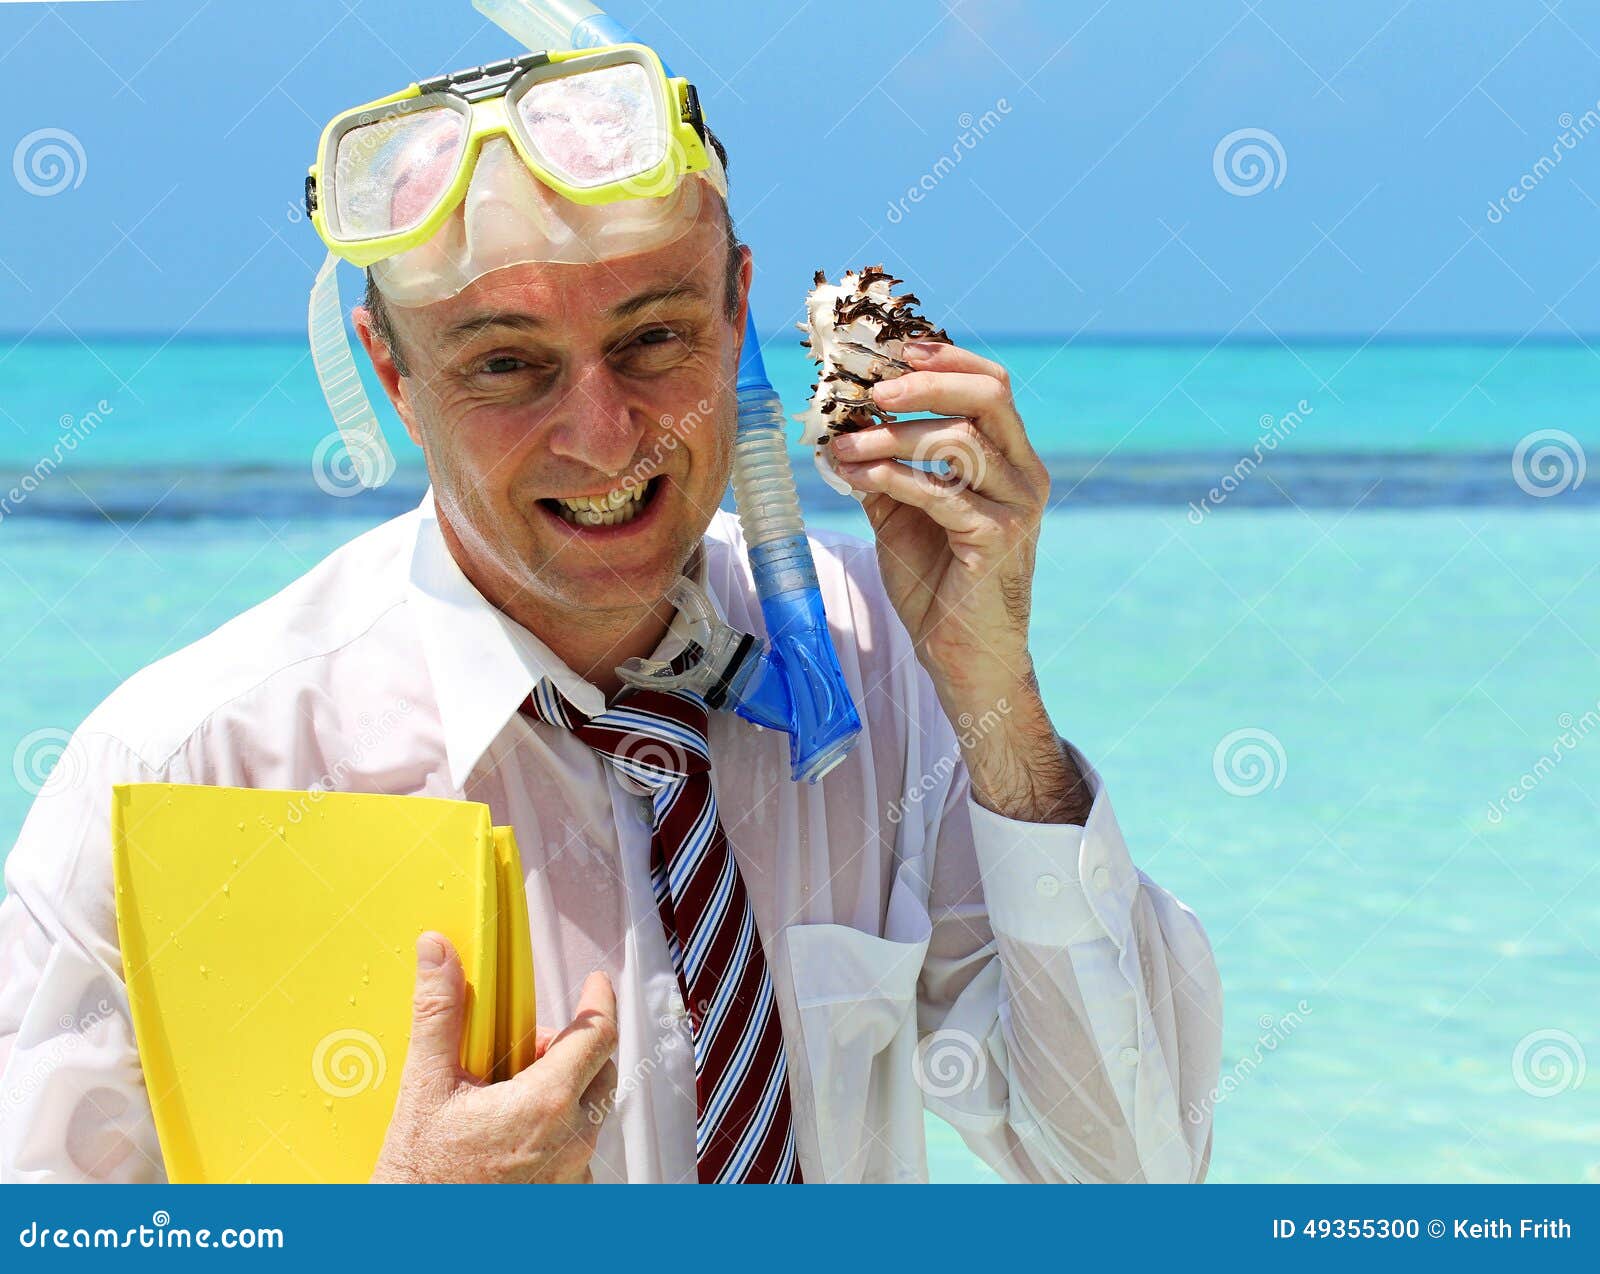 No Telephone Reception Here Stock Photo - Image of conceptual ...